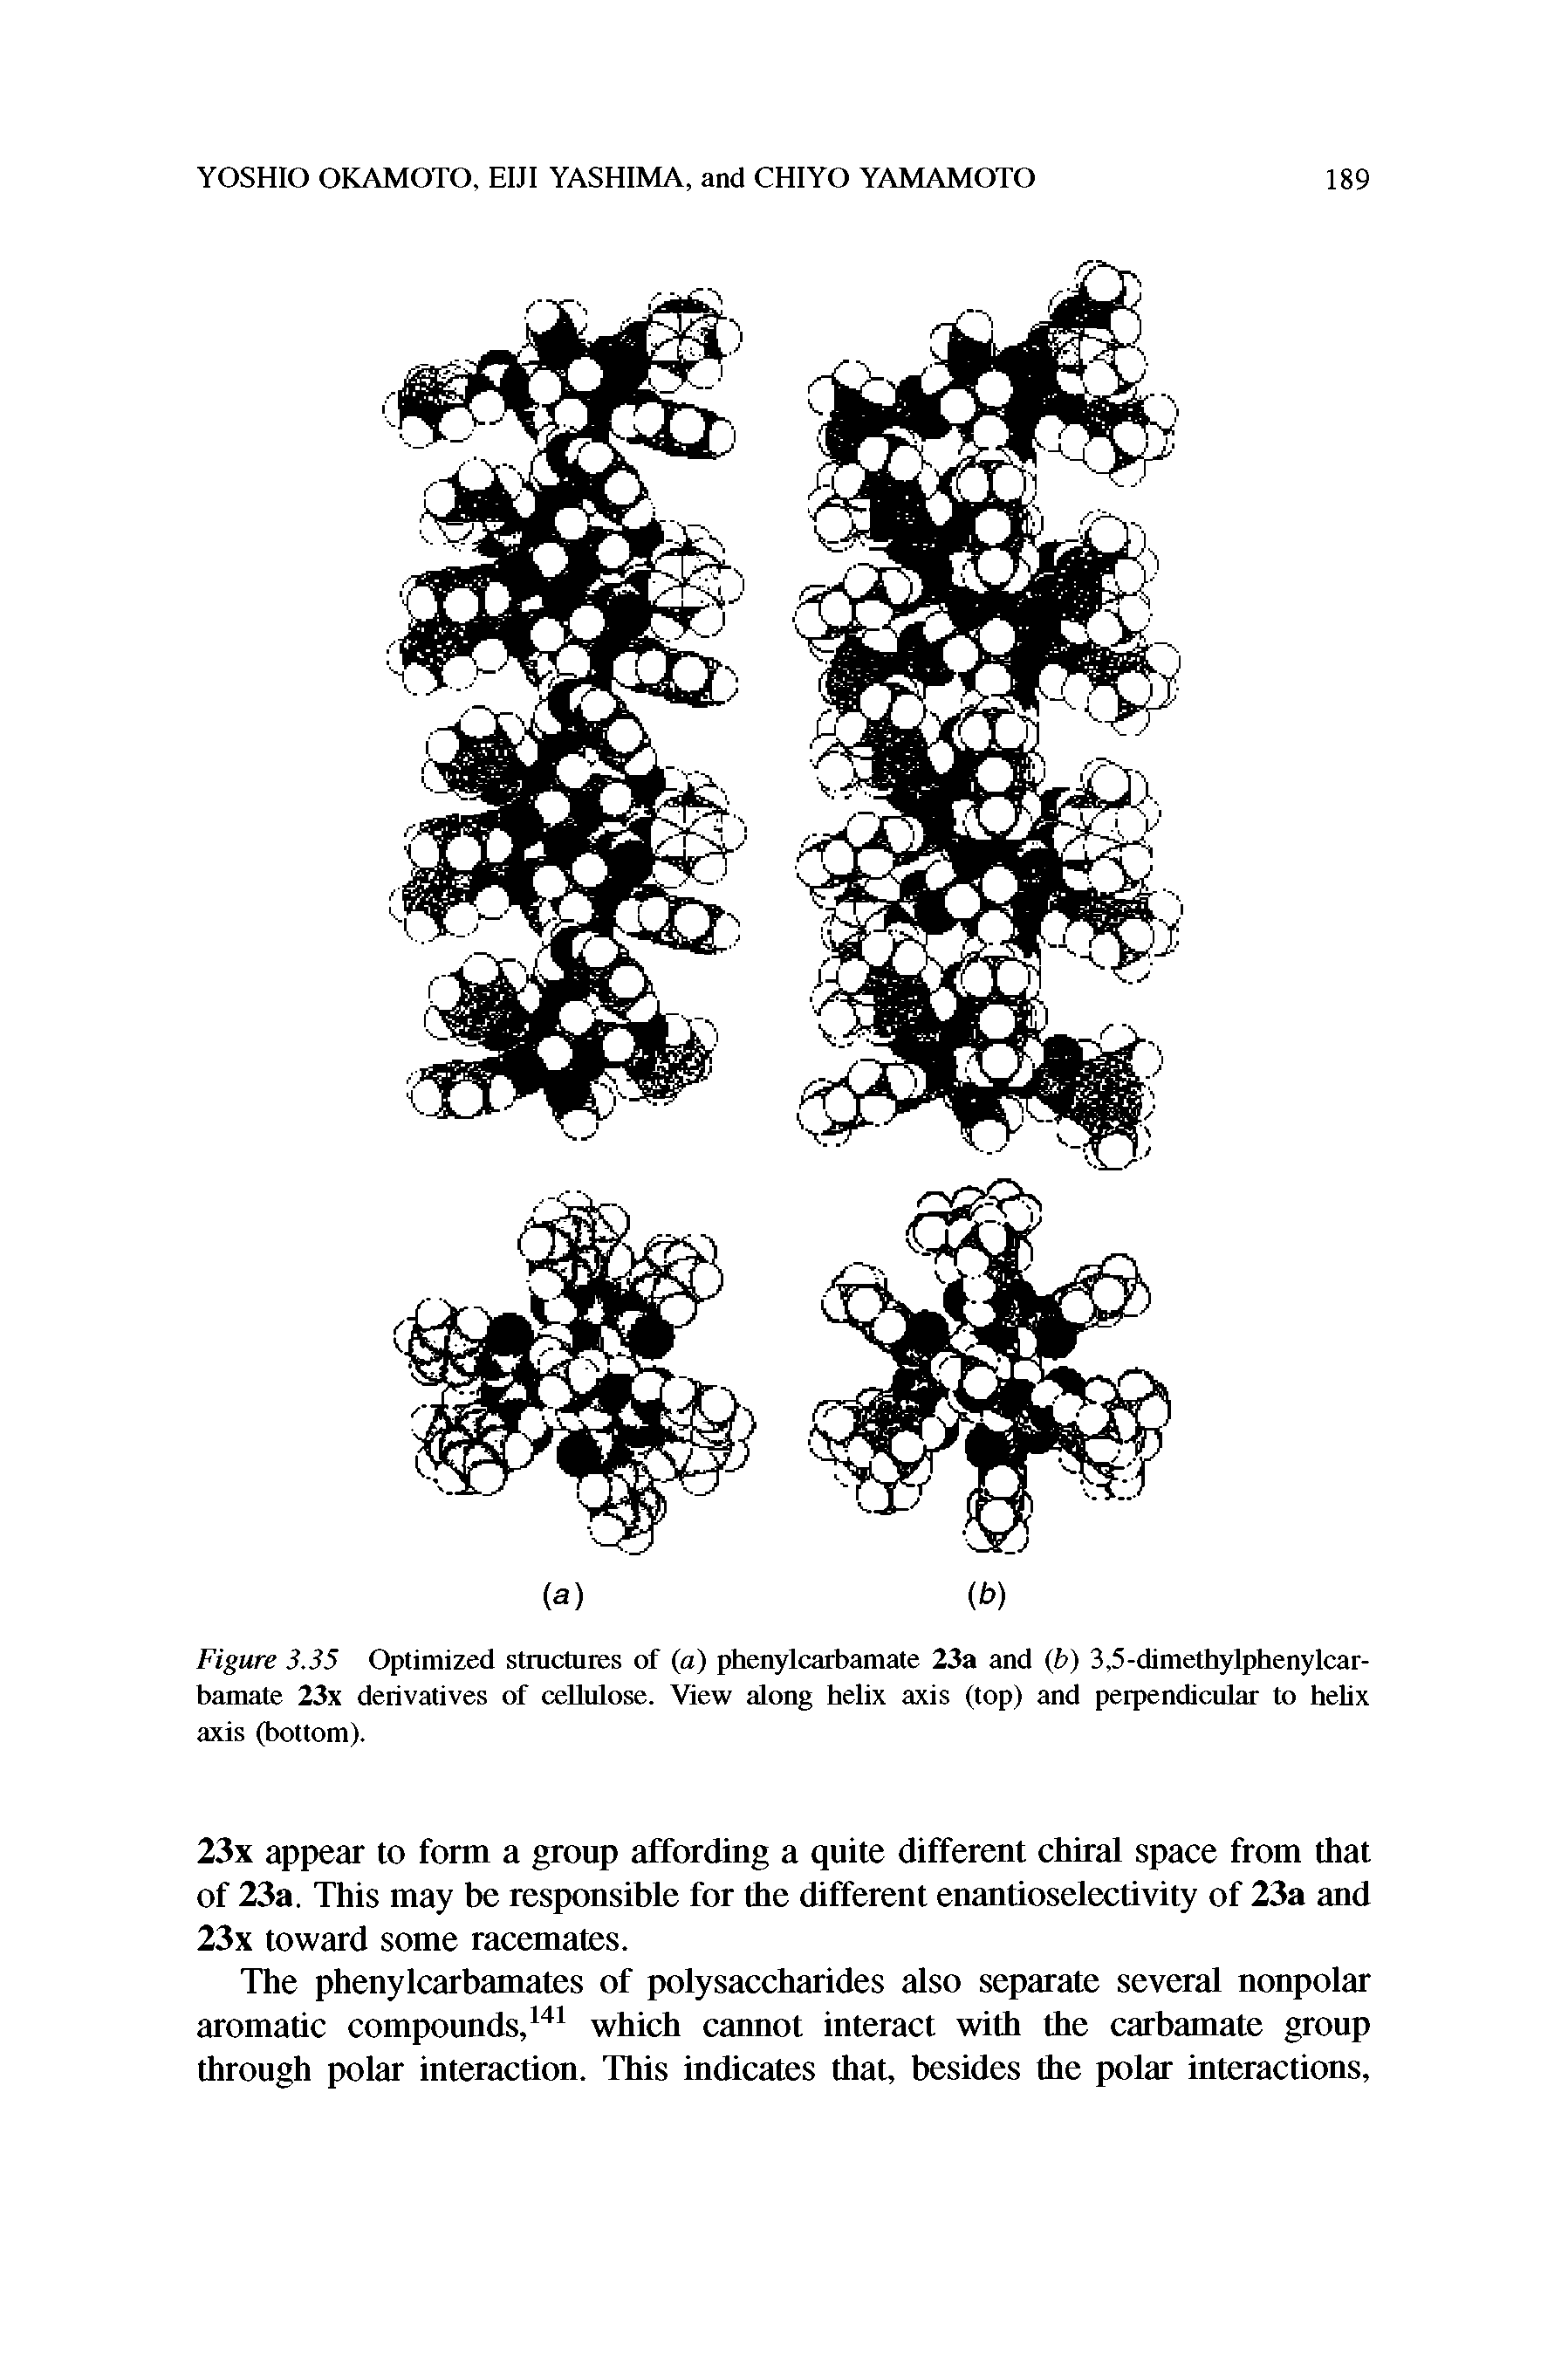 Figure 3.35 Optimized structures of (a) phenylcarbamate 23a and (b) 3,5-dimethylphenylcar-bamate 23x derivatives of cellulose. View along helix axis (top) and perpendicular to hebx axis (bottom).